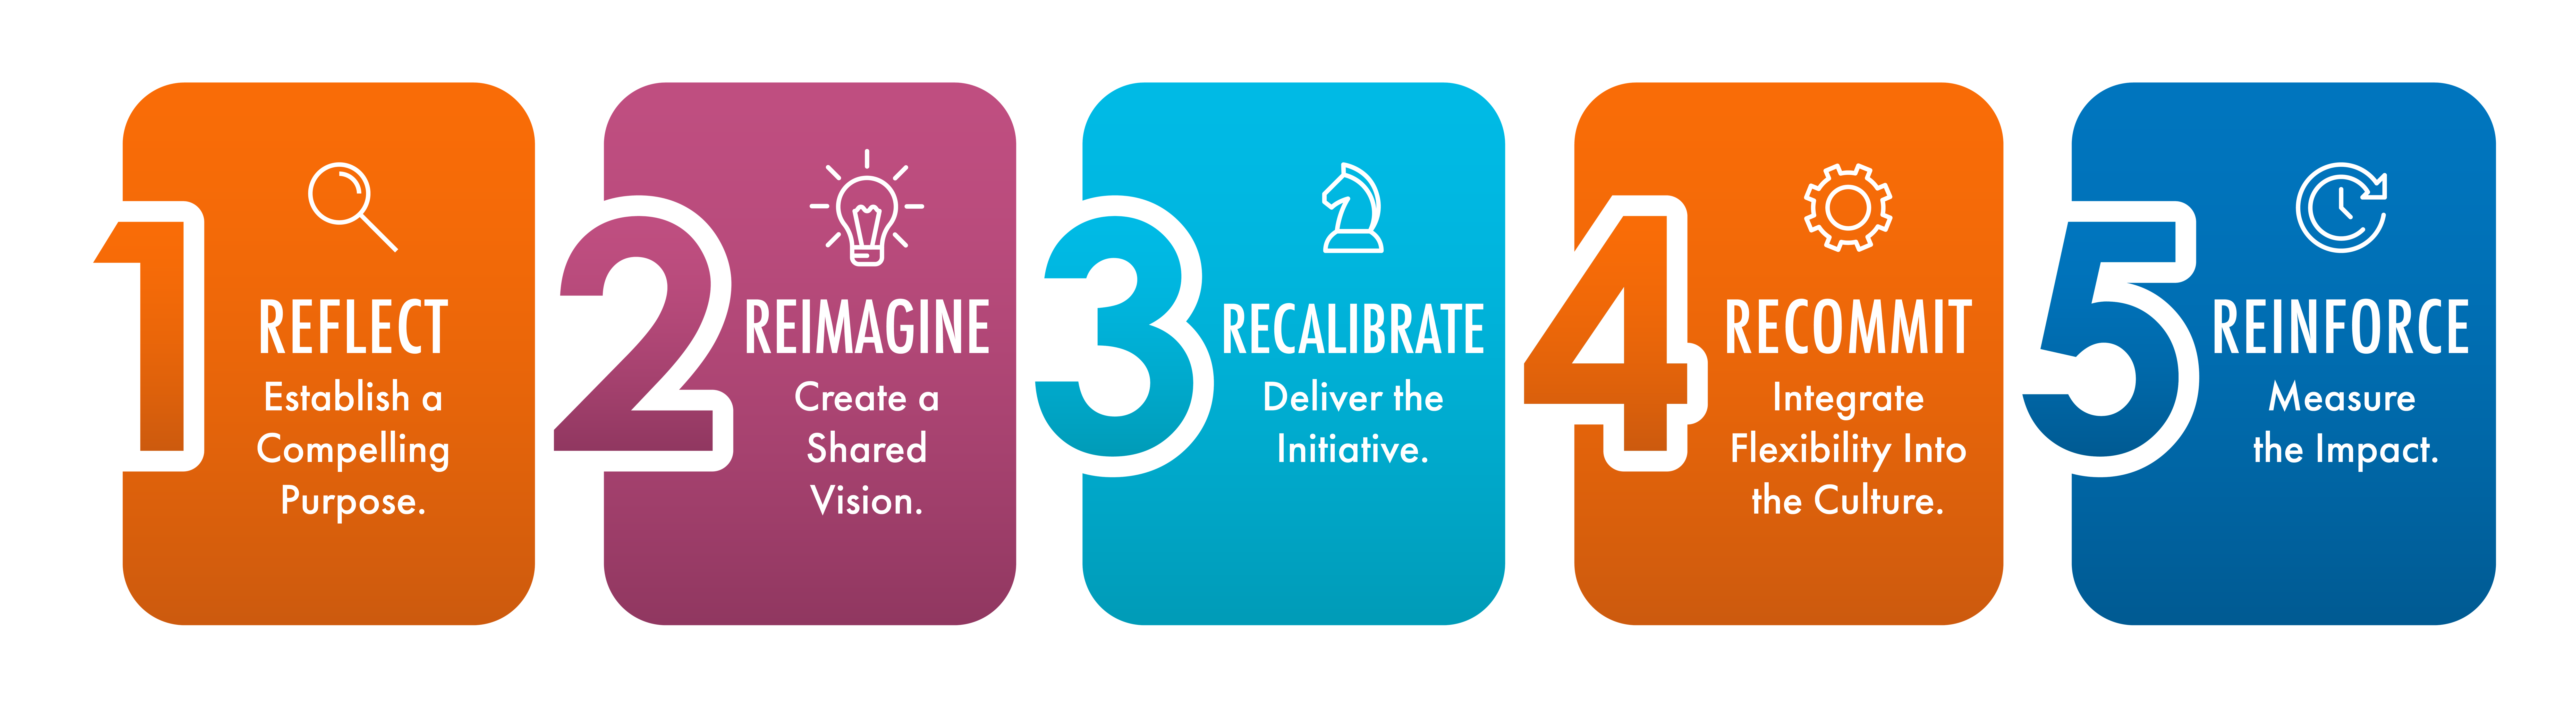 1) Reflect - establish a compelling purpose; 2) reimagine - create a shared vision; r3) ecalibrate - deliver the initiative; 4) recommit - integrate flexibility into the culture; 5) reinforce - measure the impact